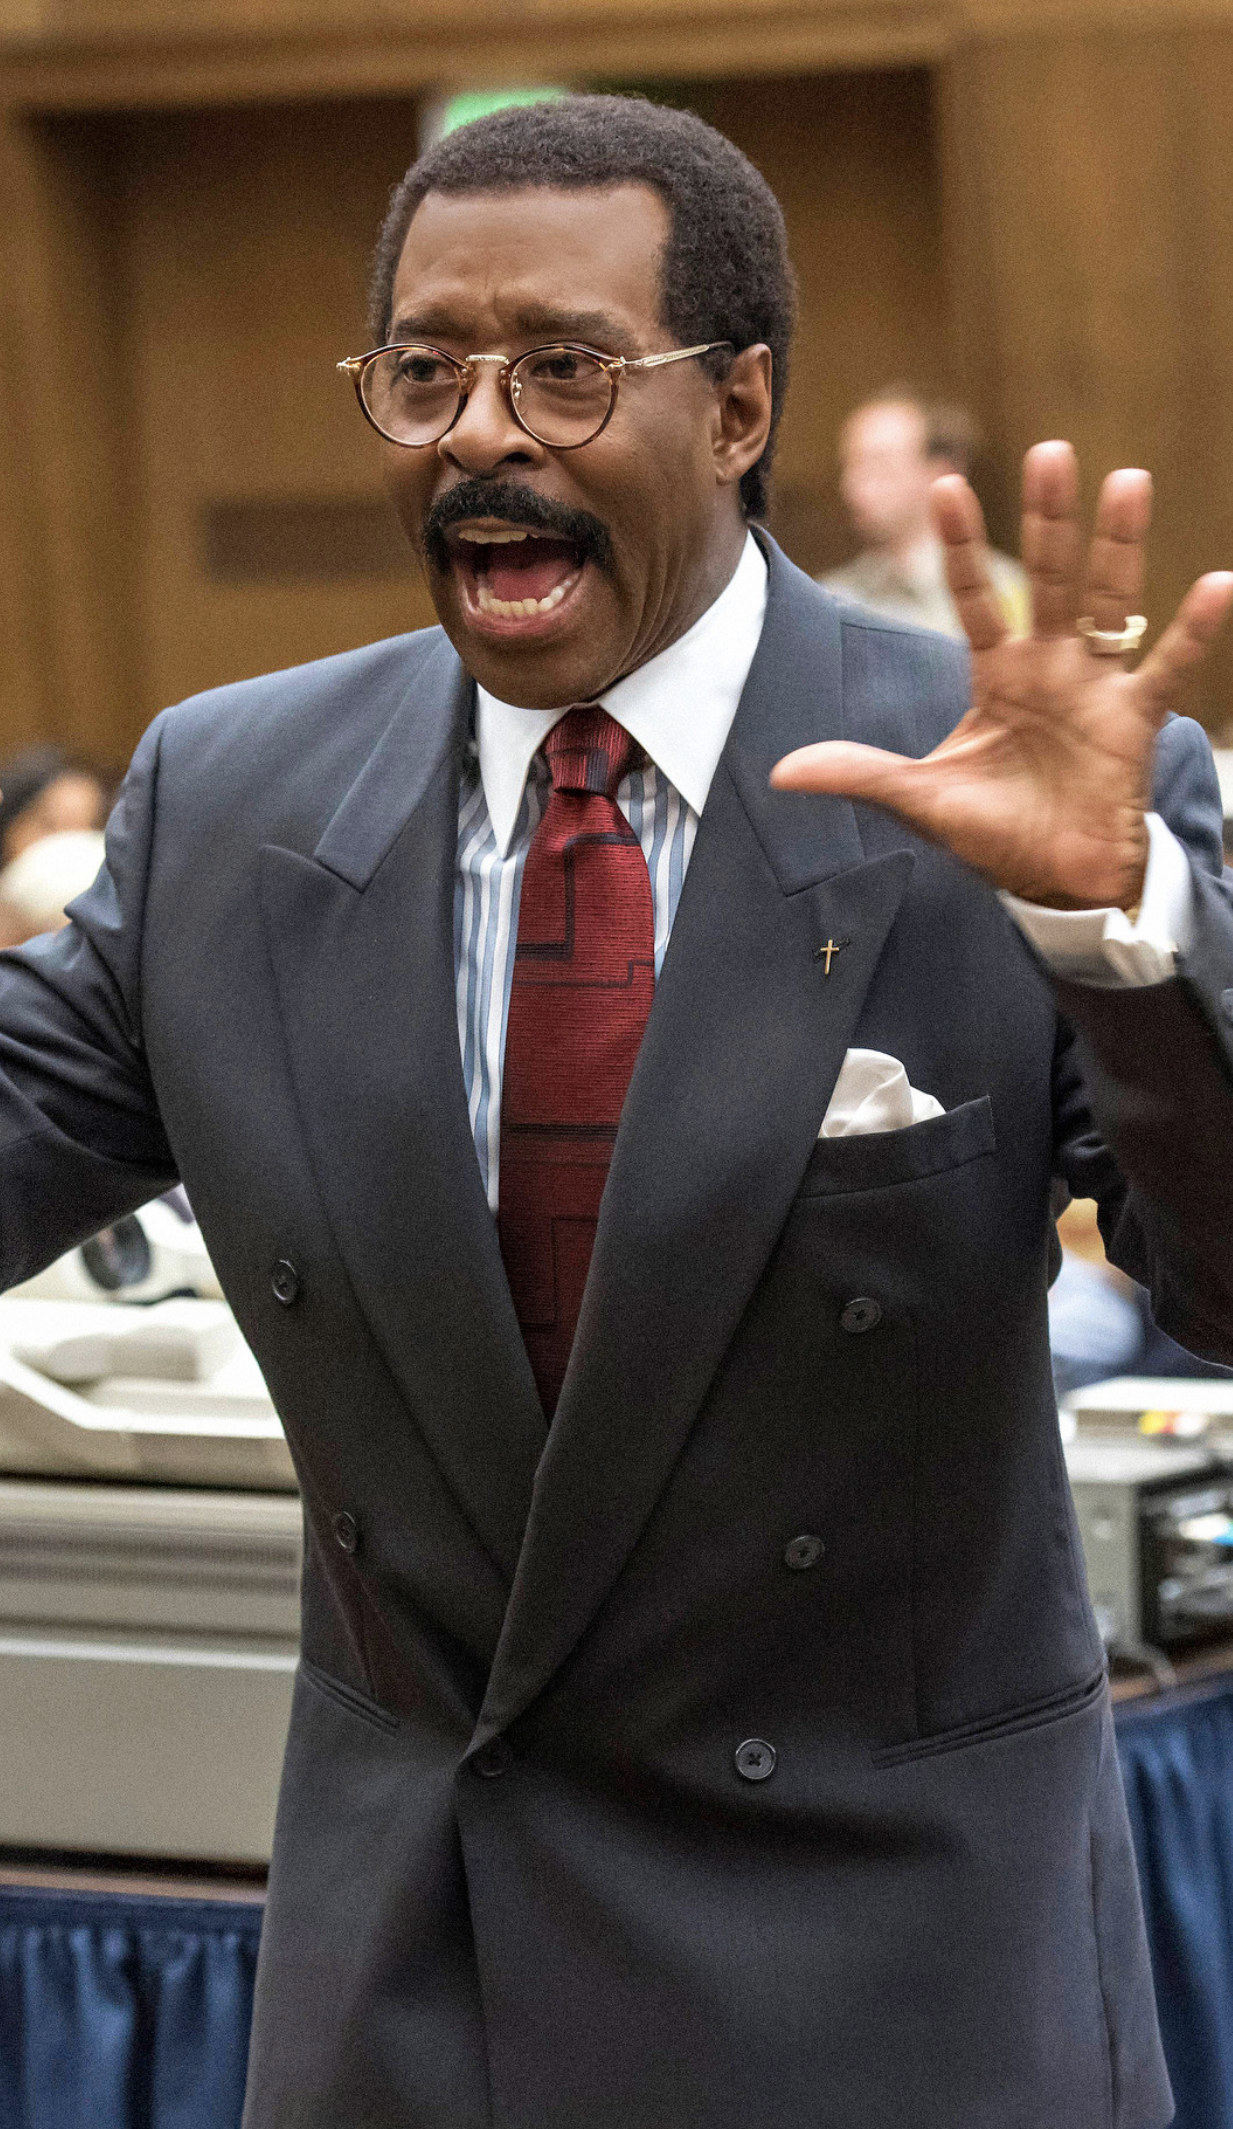 Vance wearing Cochran&#x27;s infamous glasses and suit; Putting his hands up in court